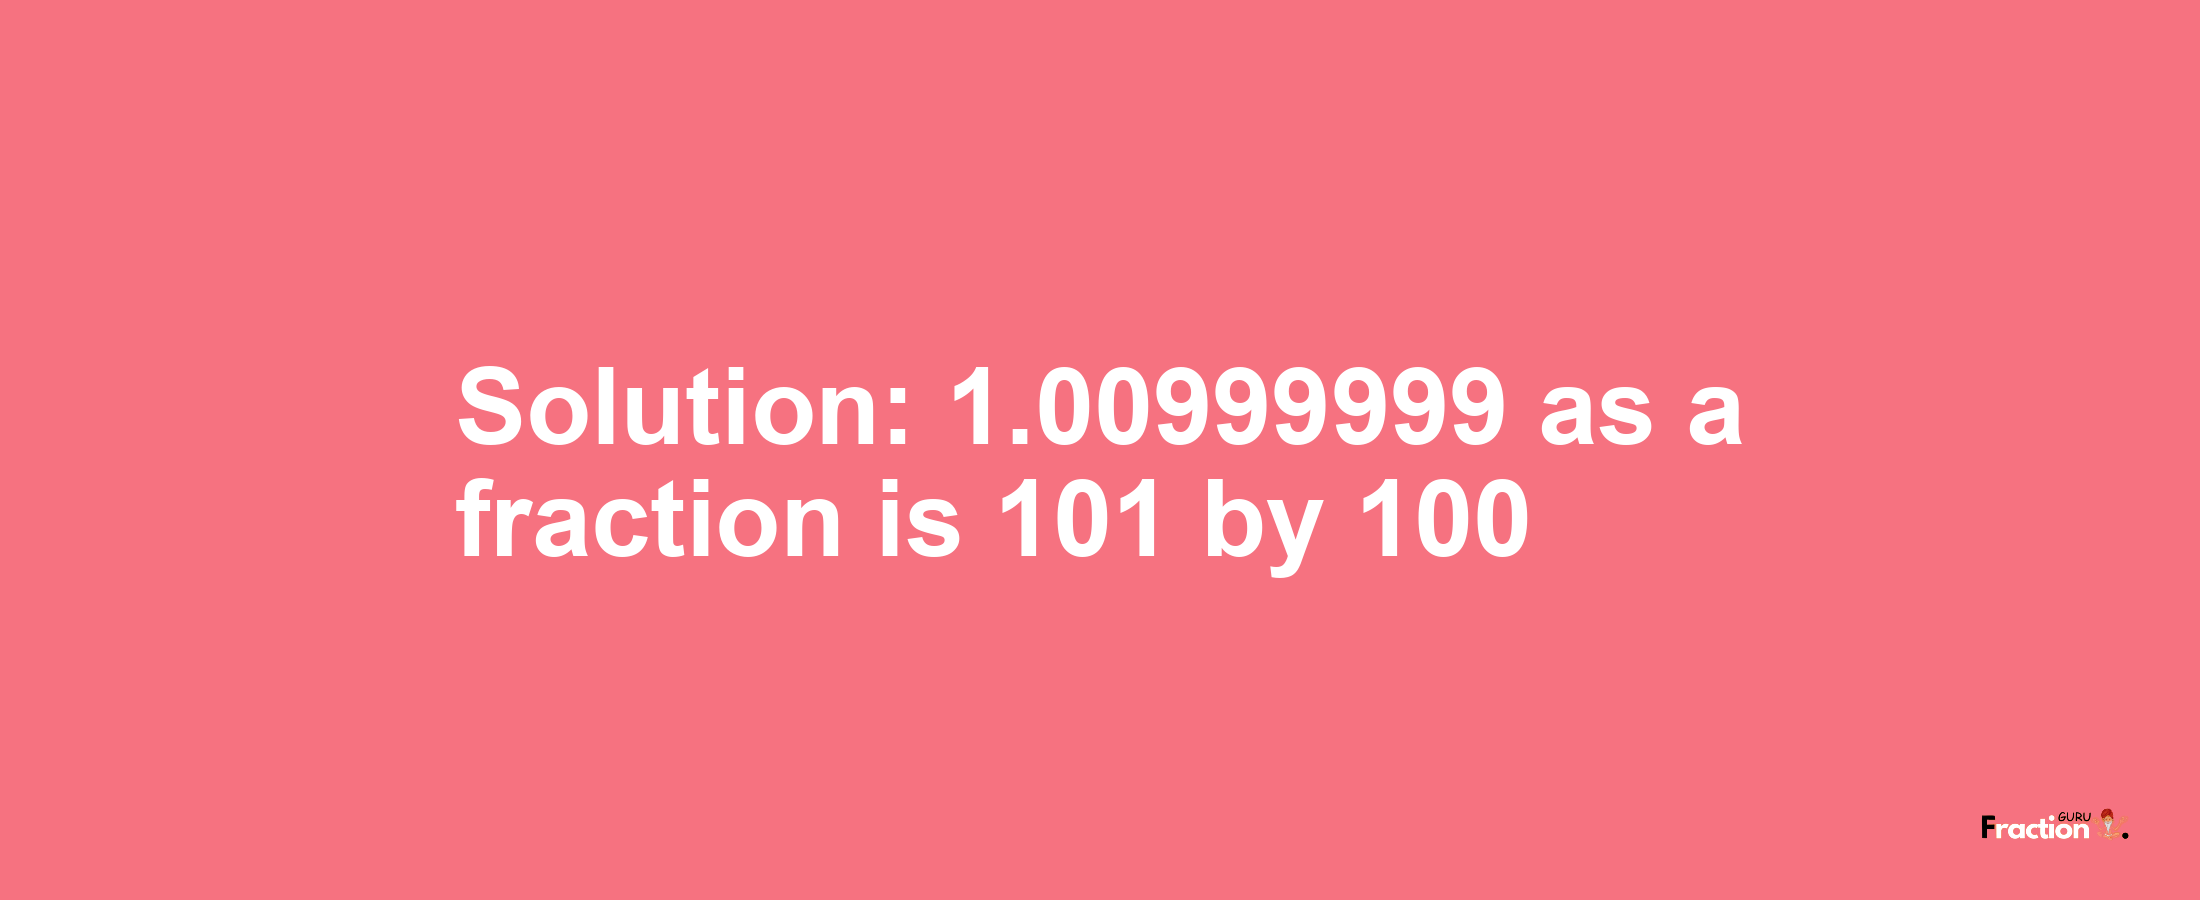 Solution:1.00999999 as a fraction is 101/100